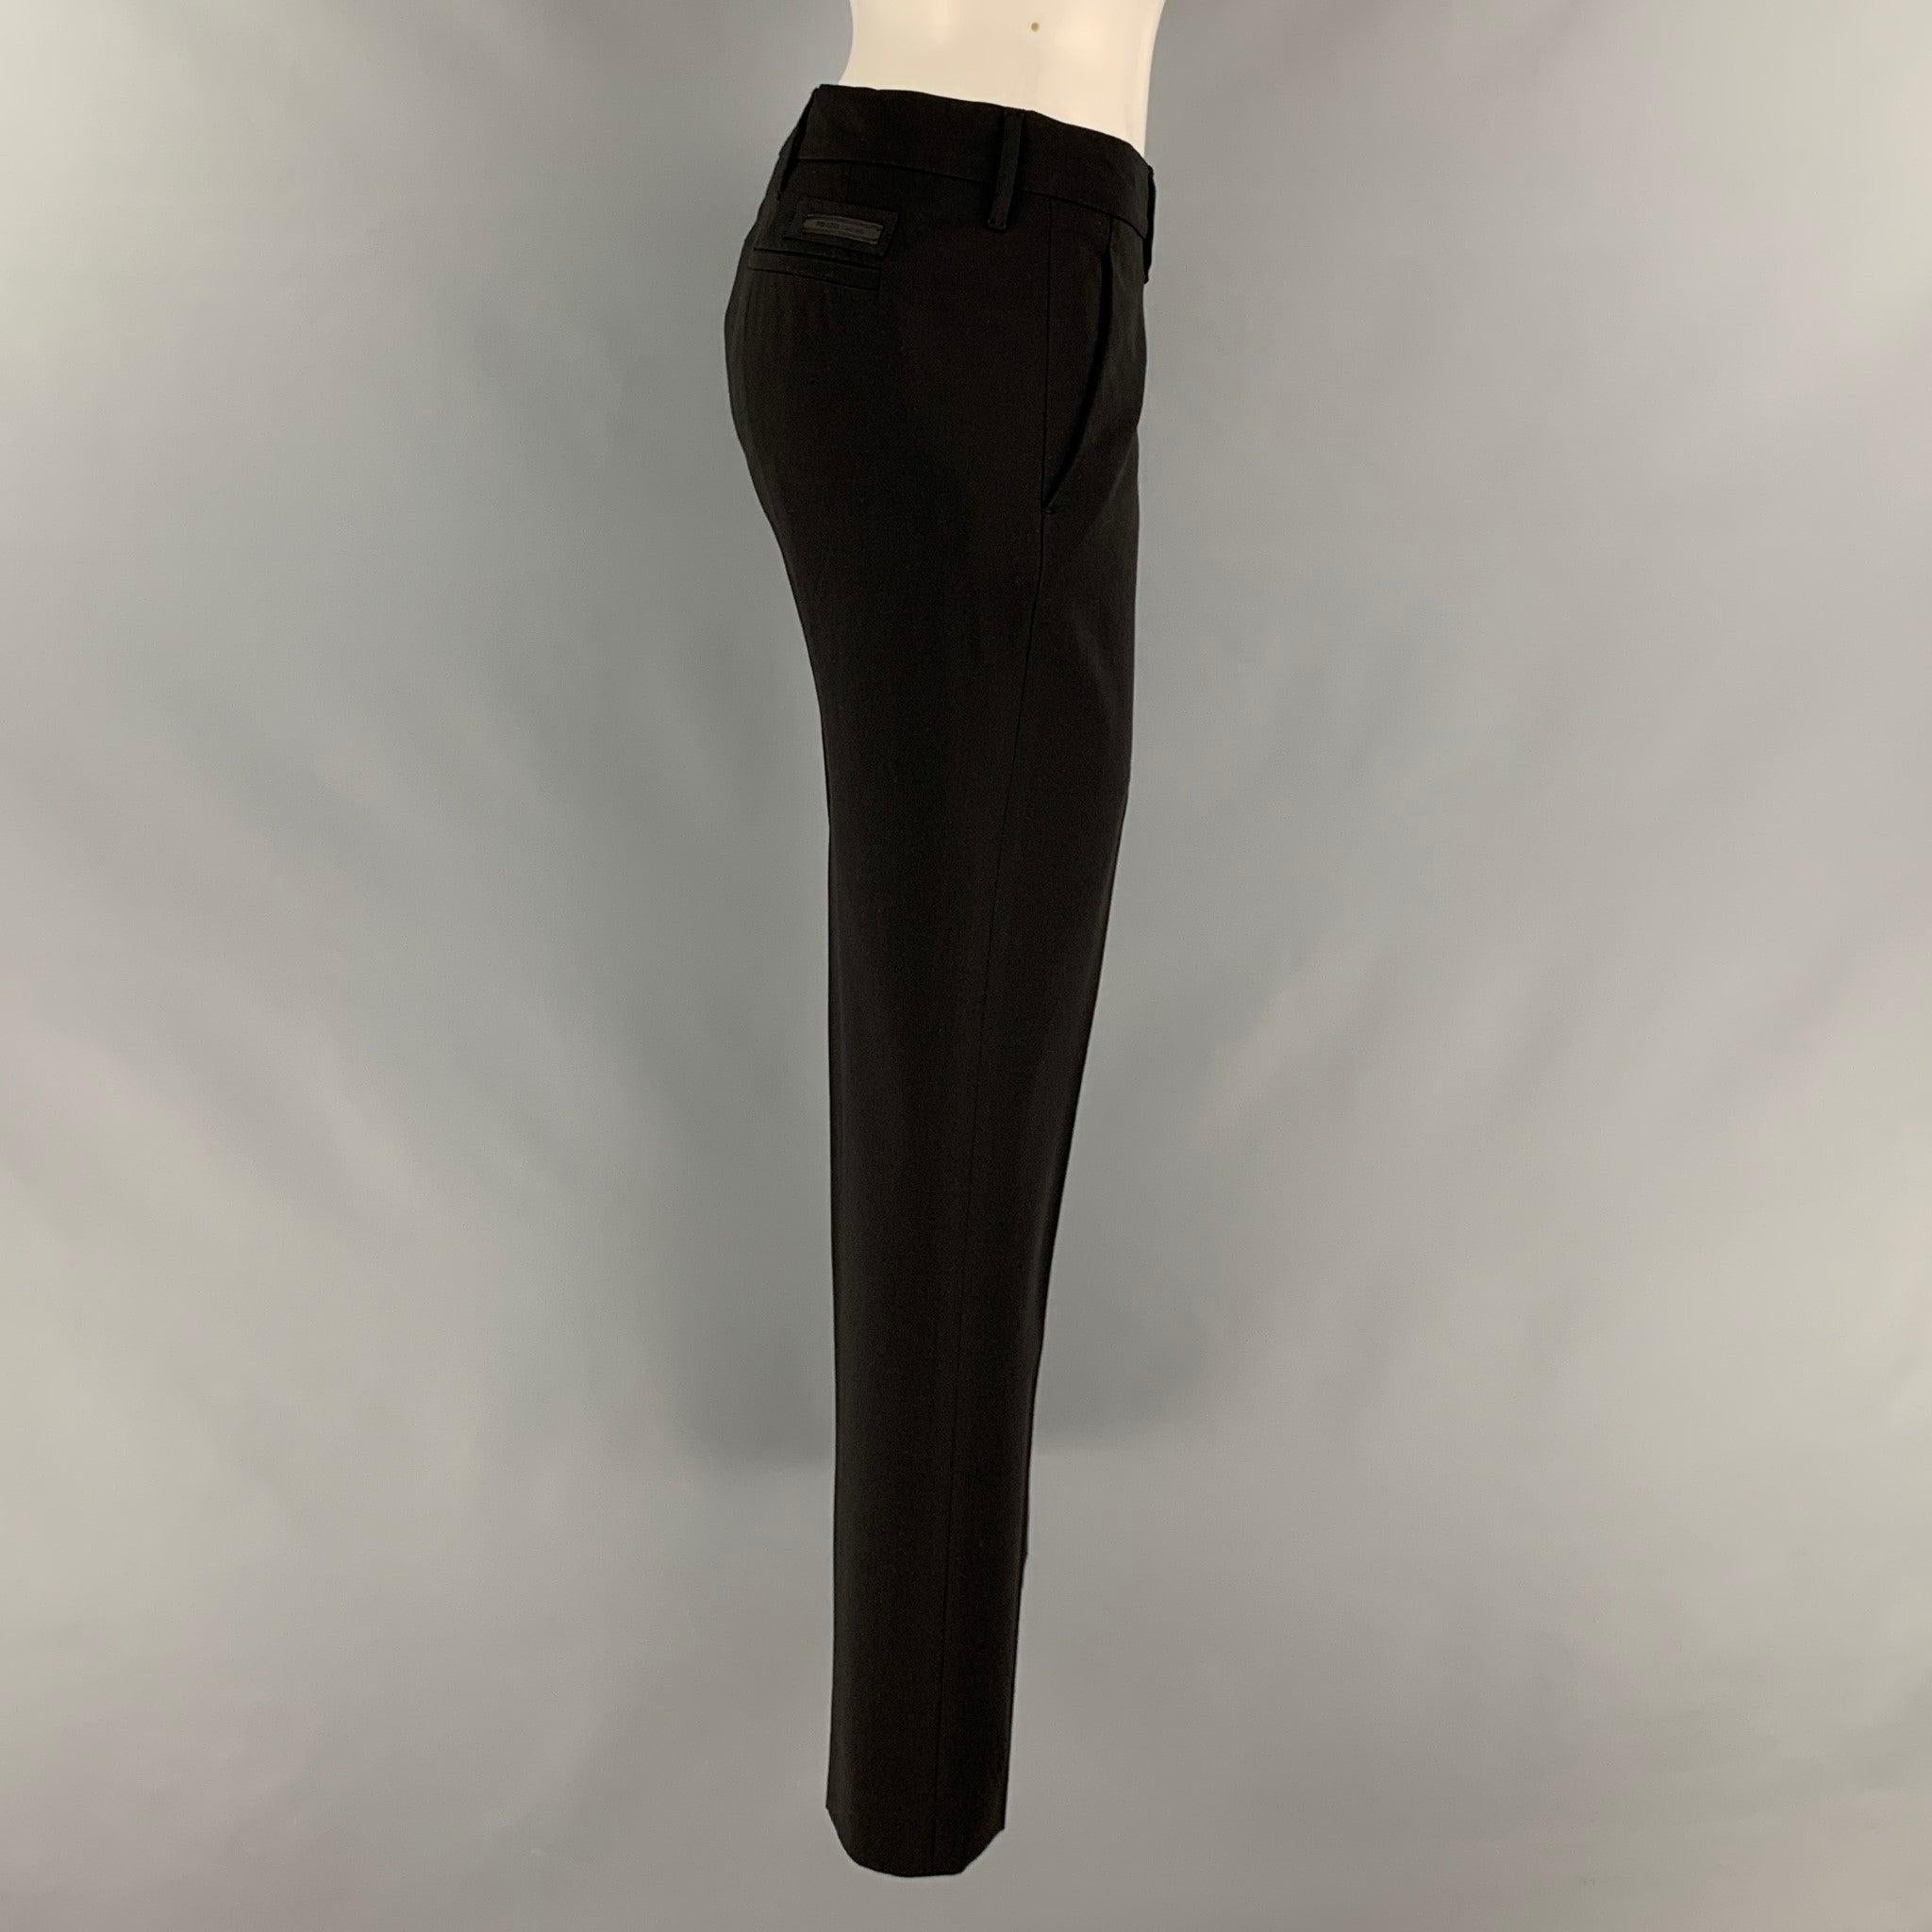 PRADA dress pants comes in a black polyester and viscose material featuring a straight style, front tab, and a zip fly closure. Made in Italy.Good Pre-Owned Condition. Moderate Signs of Wear. As- Is. 

Marked:  44 

Measurements: 
 Waist: 34 inches